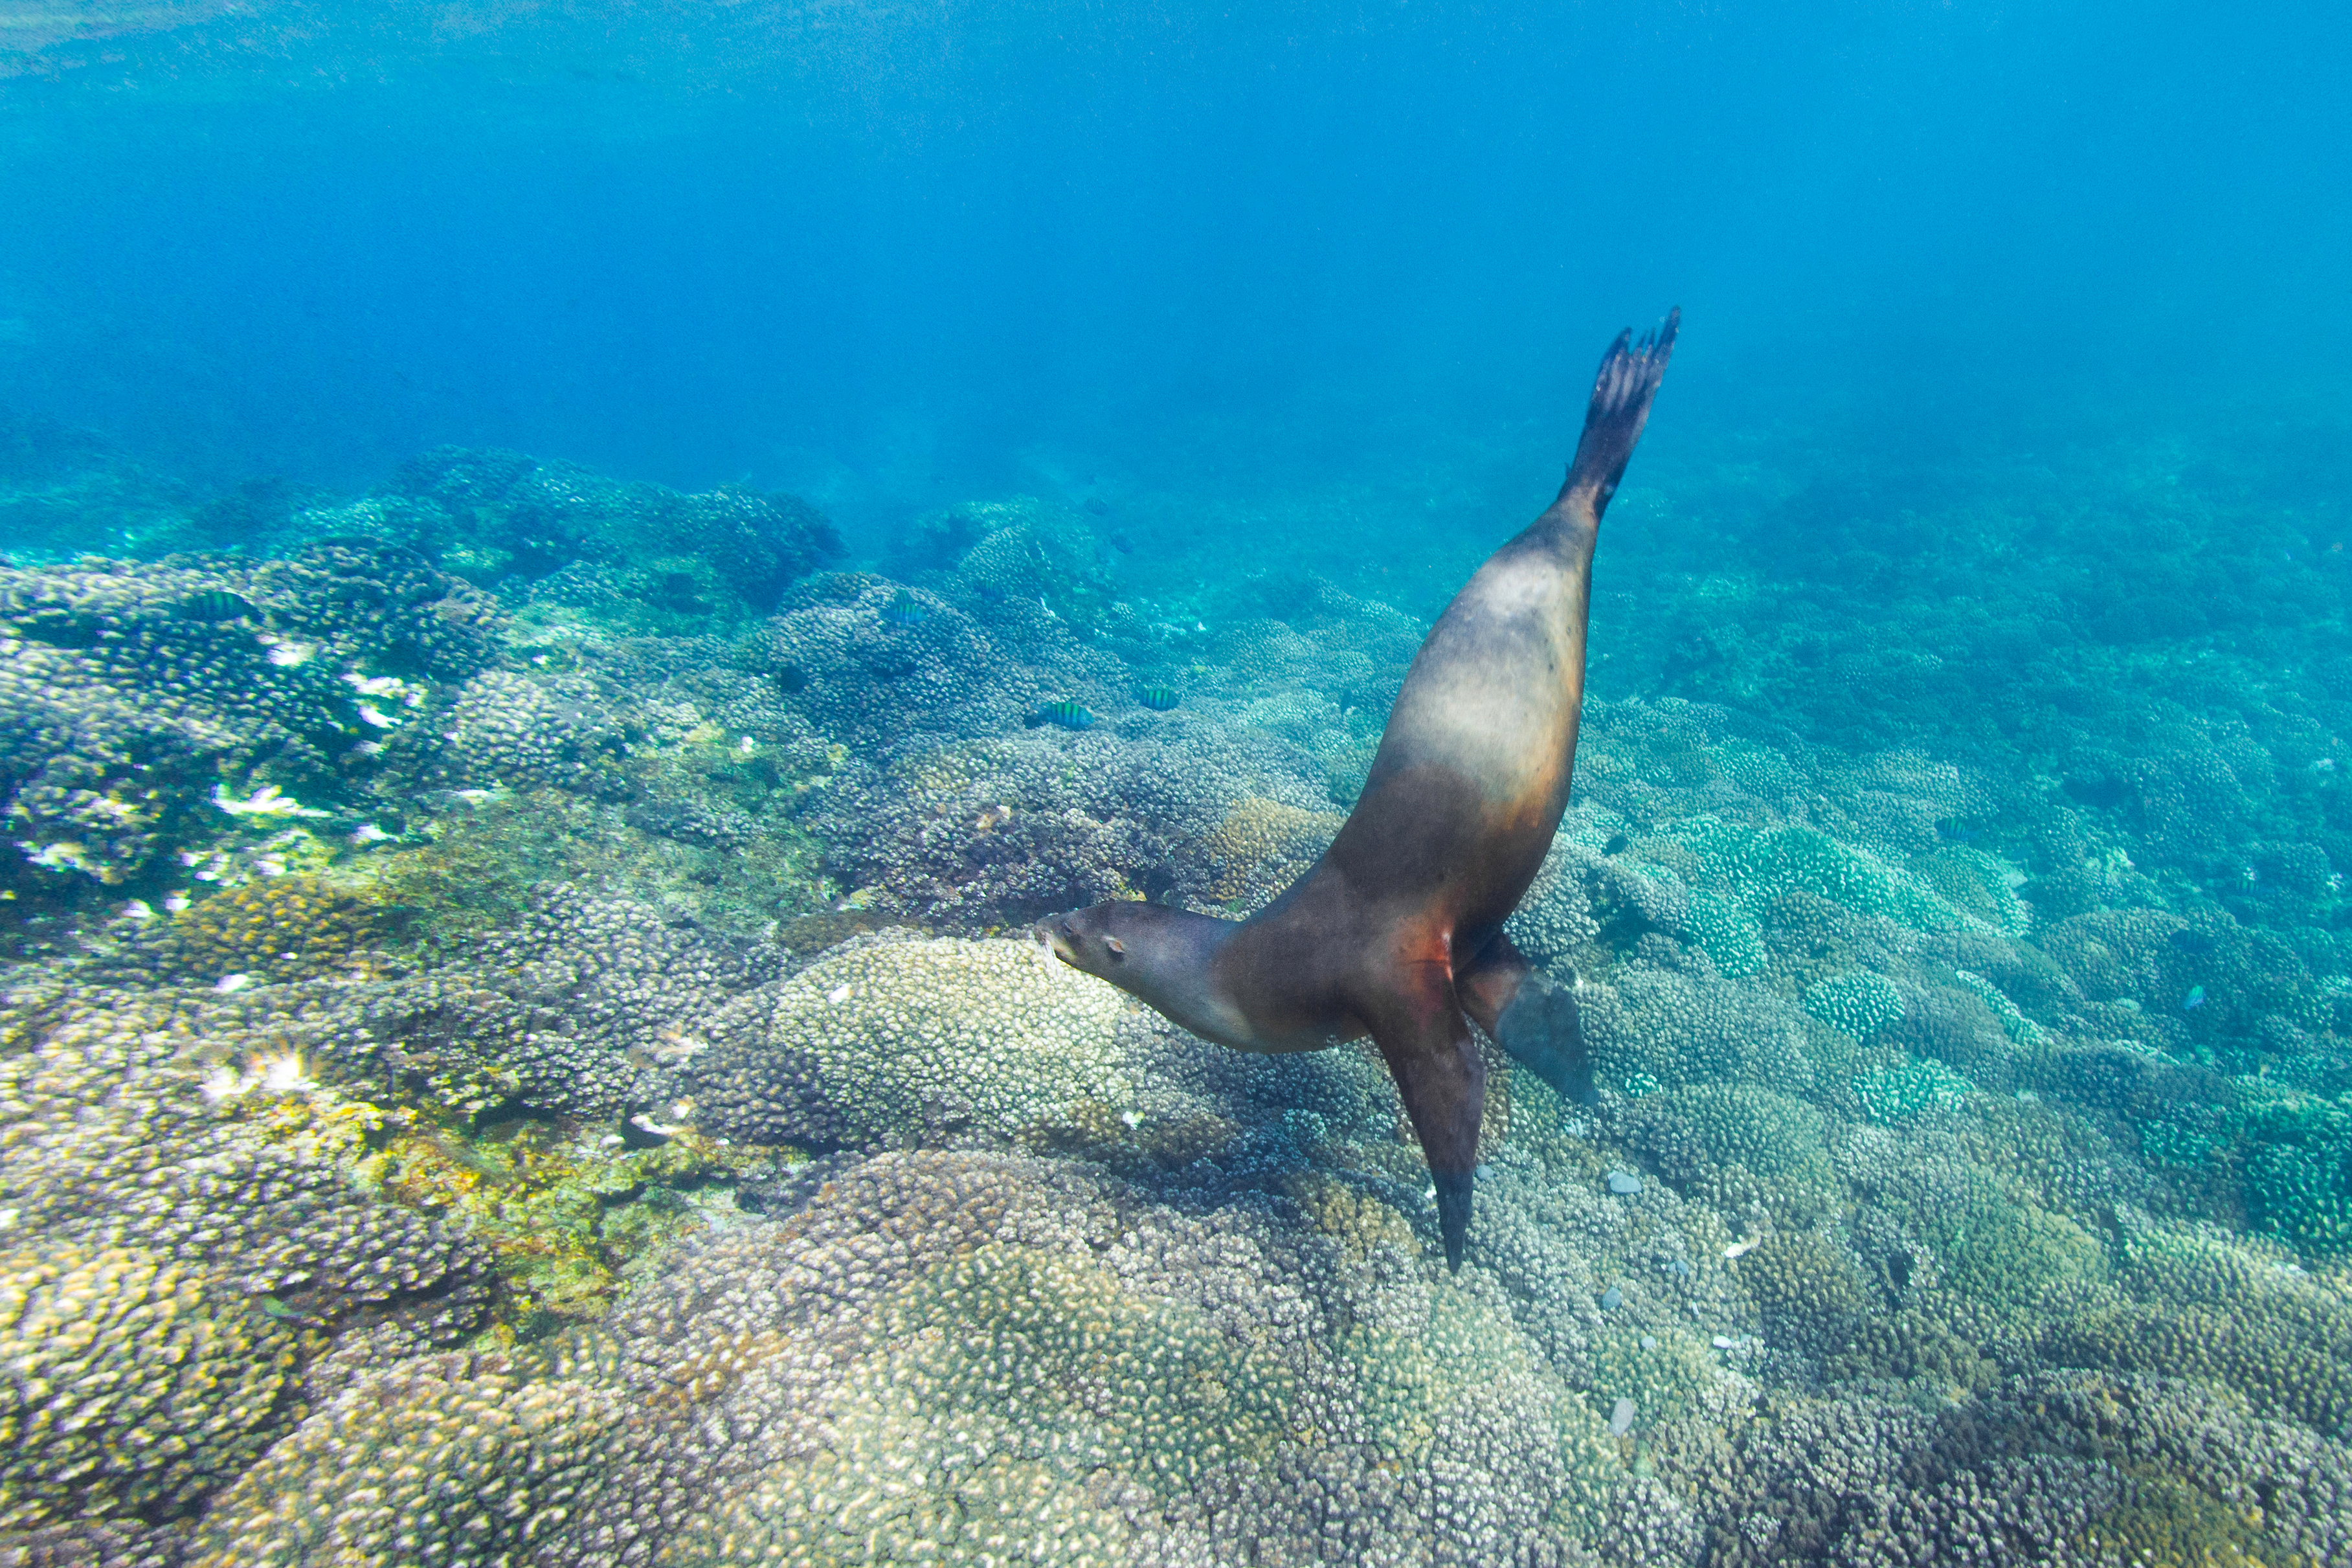 Sea lion at Cabo San Lucas, Mexico, by Kate Holt